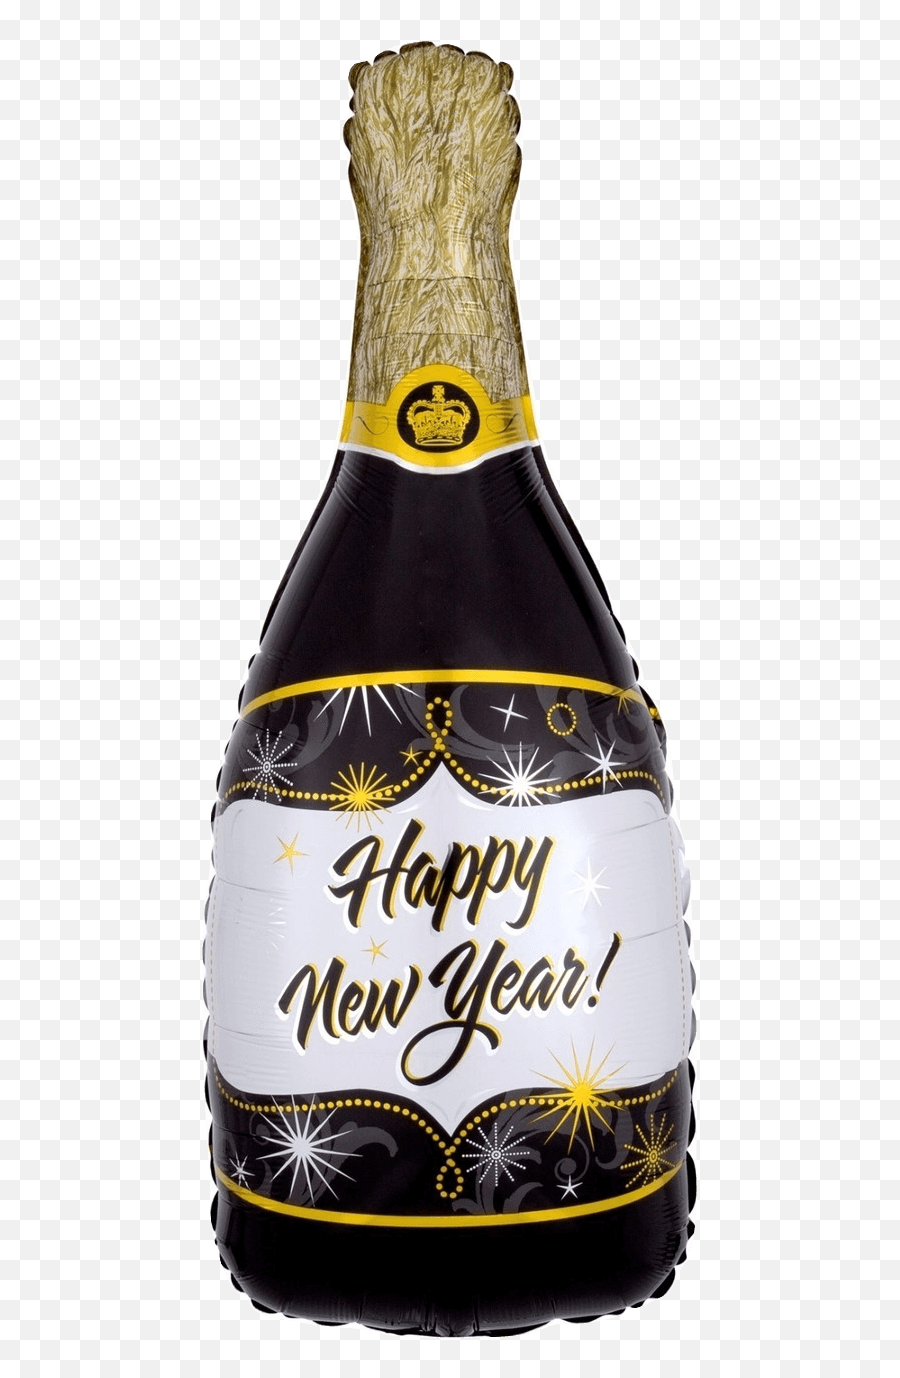 Year Giant Champagne Bottle Balloon - Glass Bottle Emoji,Champagne Bottle Emoji